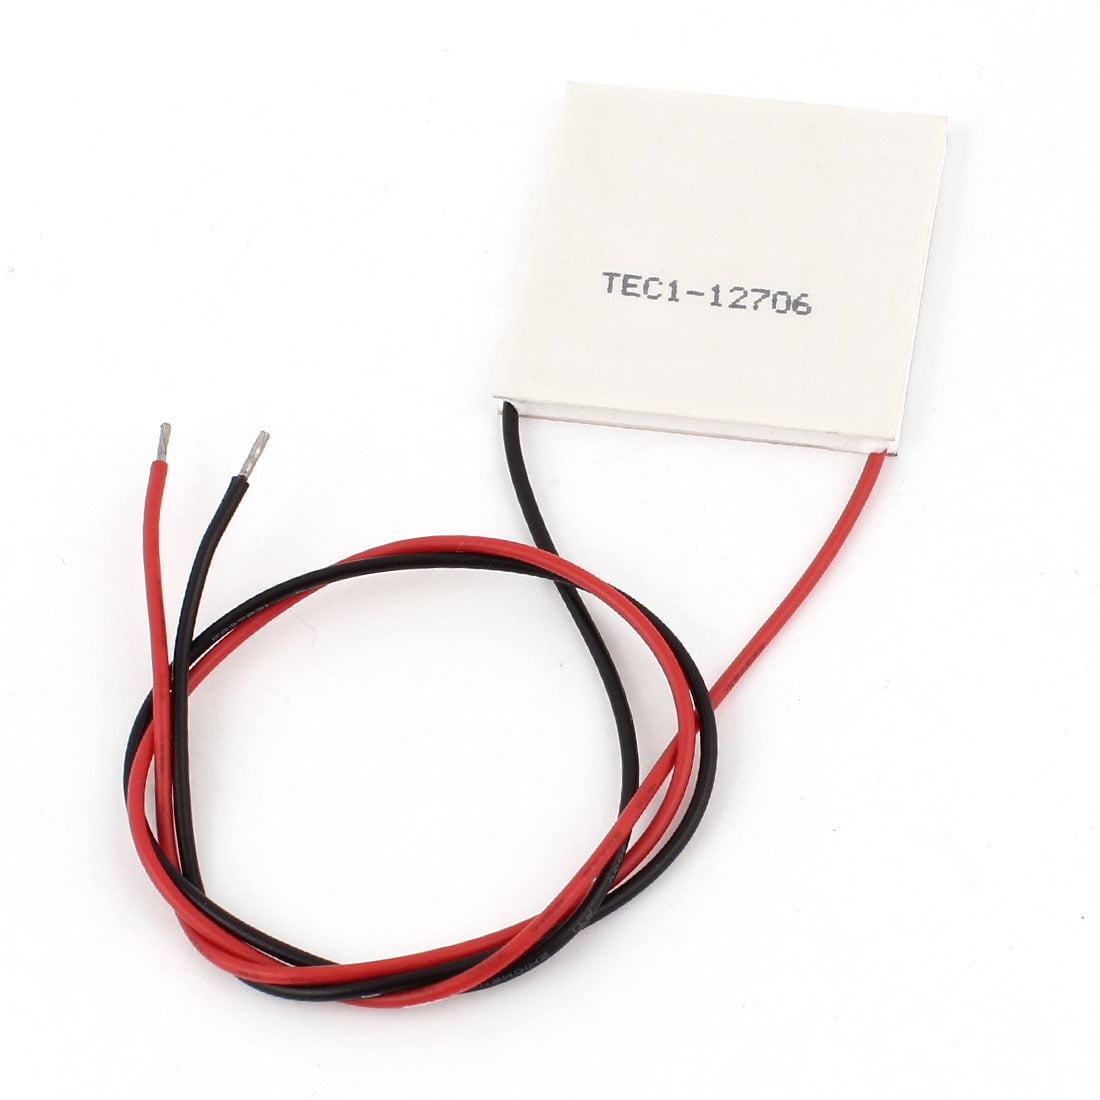 TES1-12704 12V Thermoelectric Cooler Cooling Peltier Plate Module 30 x 30mm B20 